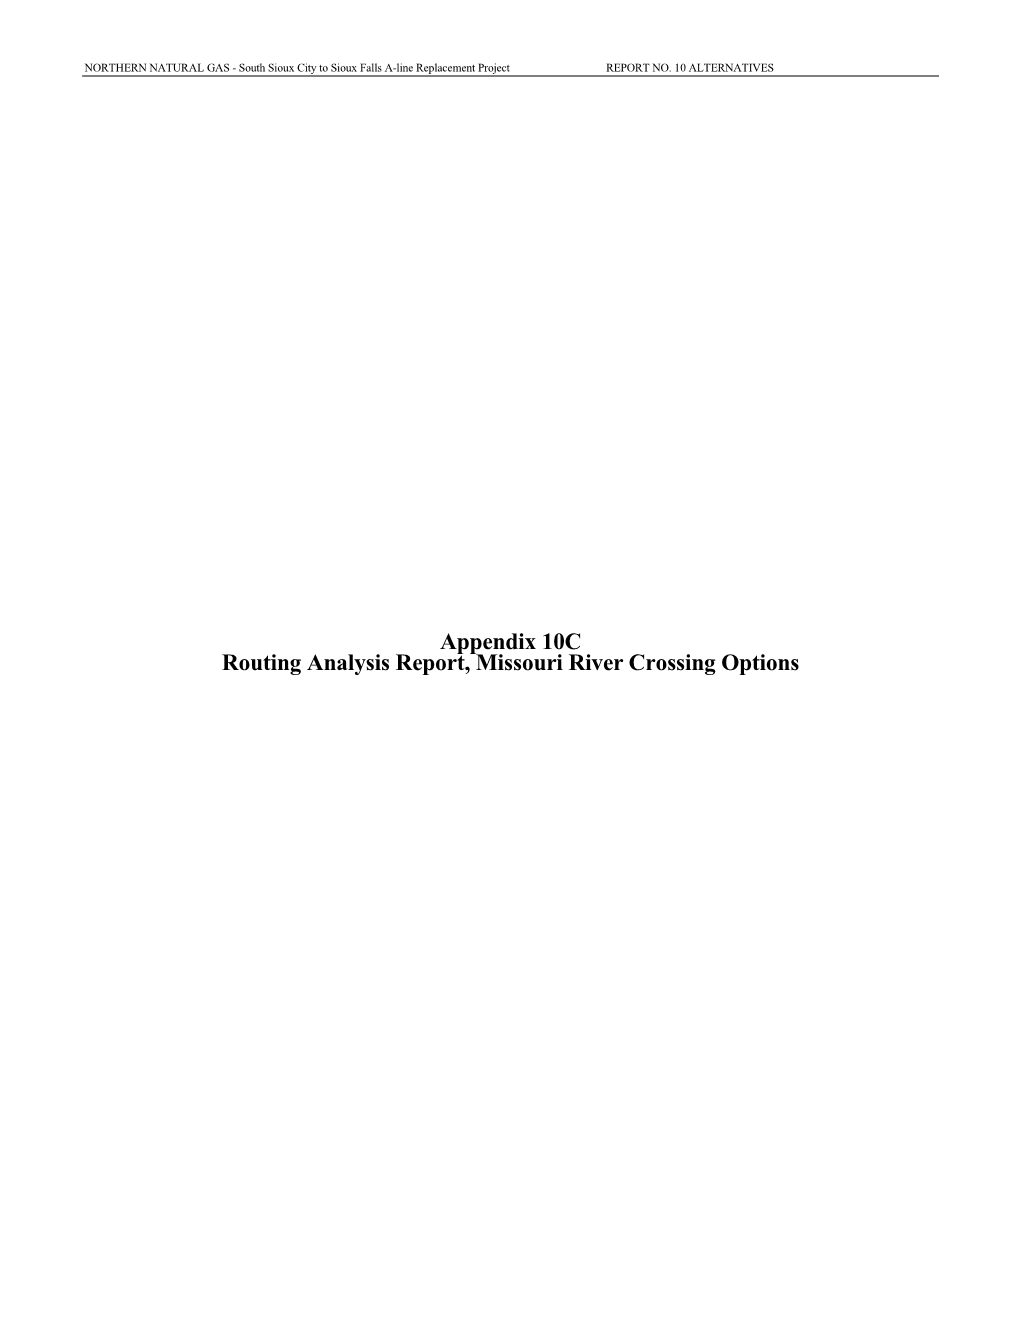 Appendix 10C Routing Analysis Report, Missouri River Crossing Options Routing Analysis